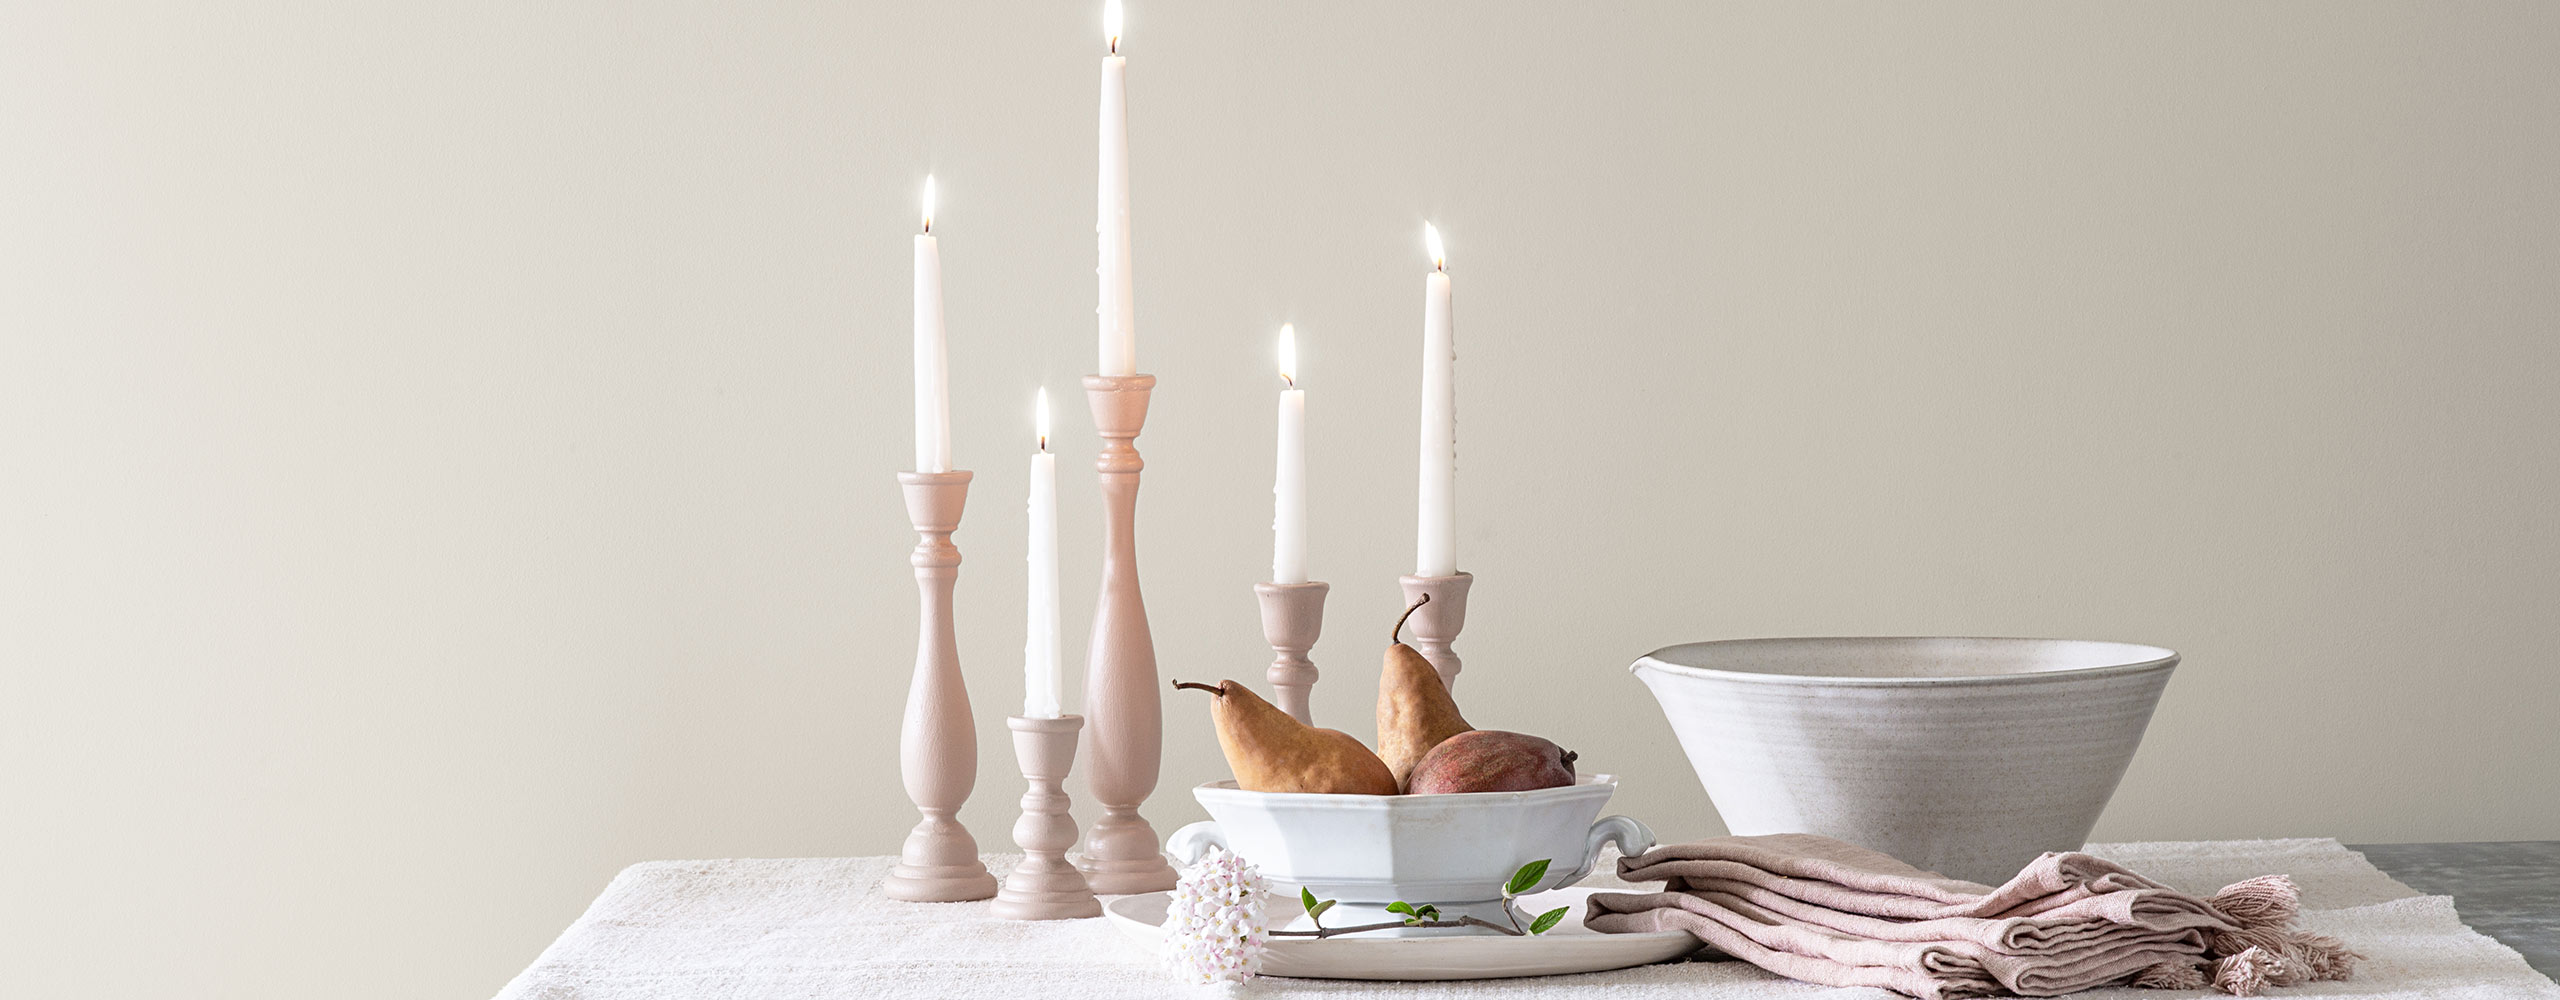 Lit tapered candles, two white porcelain bowls and off-white cloth napkins sit on a table against a white-painted wall.